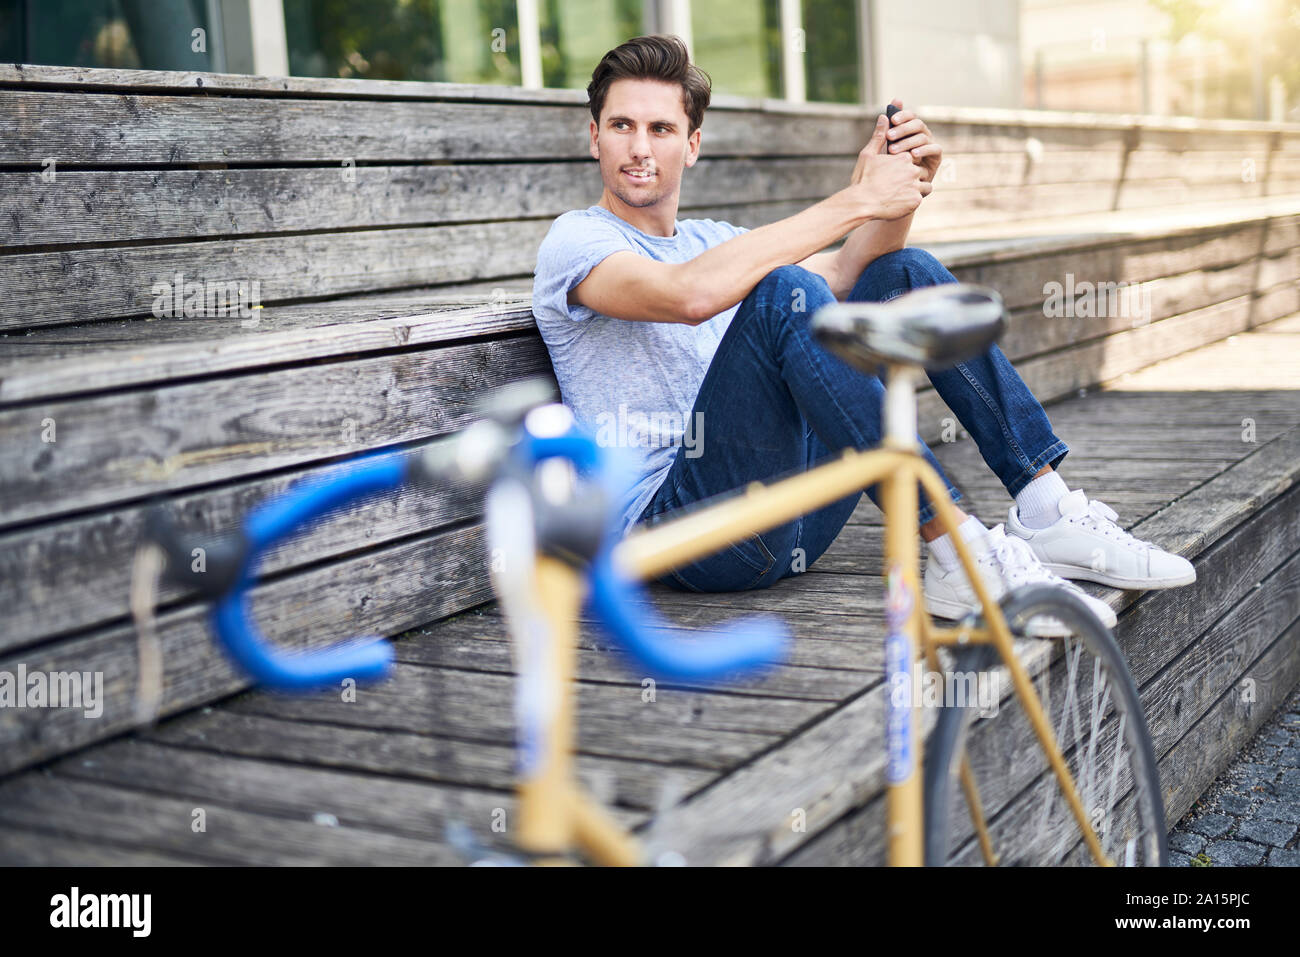 Portrait of man with racing bicycle sitting on bench having a rest Stock Photo